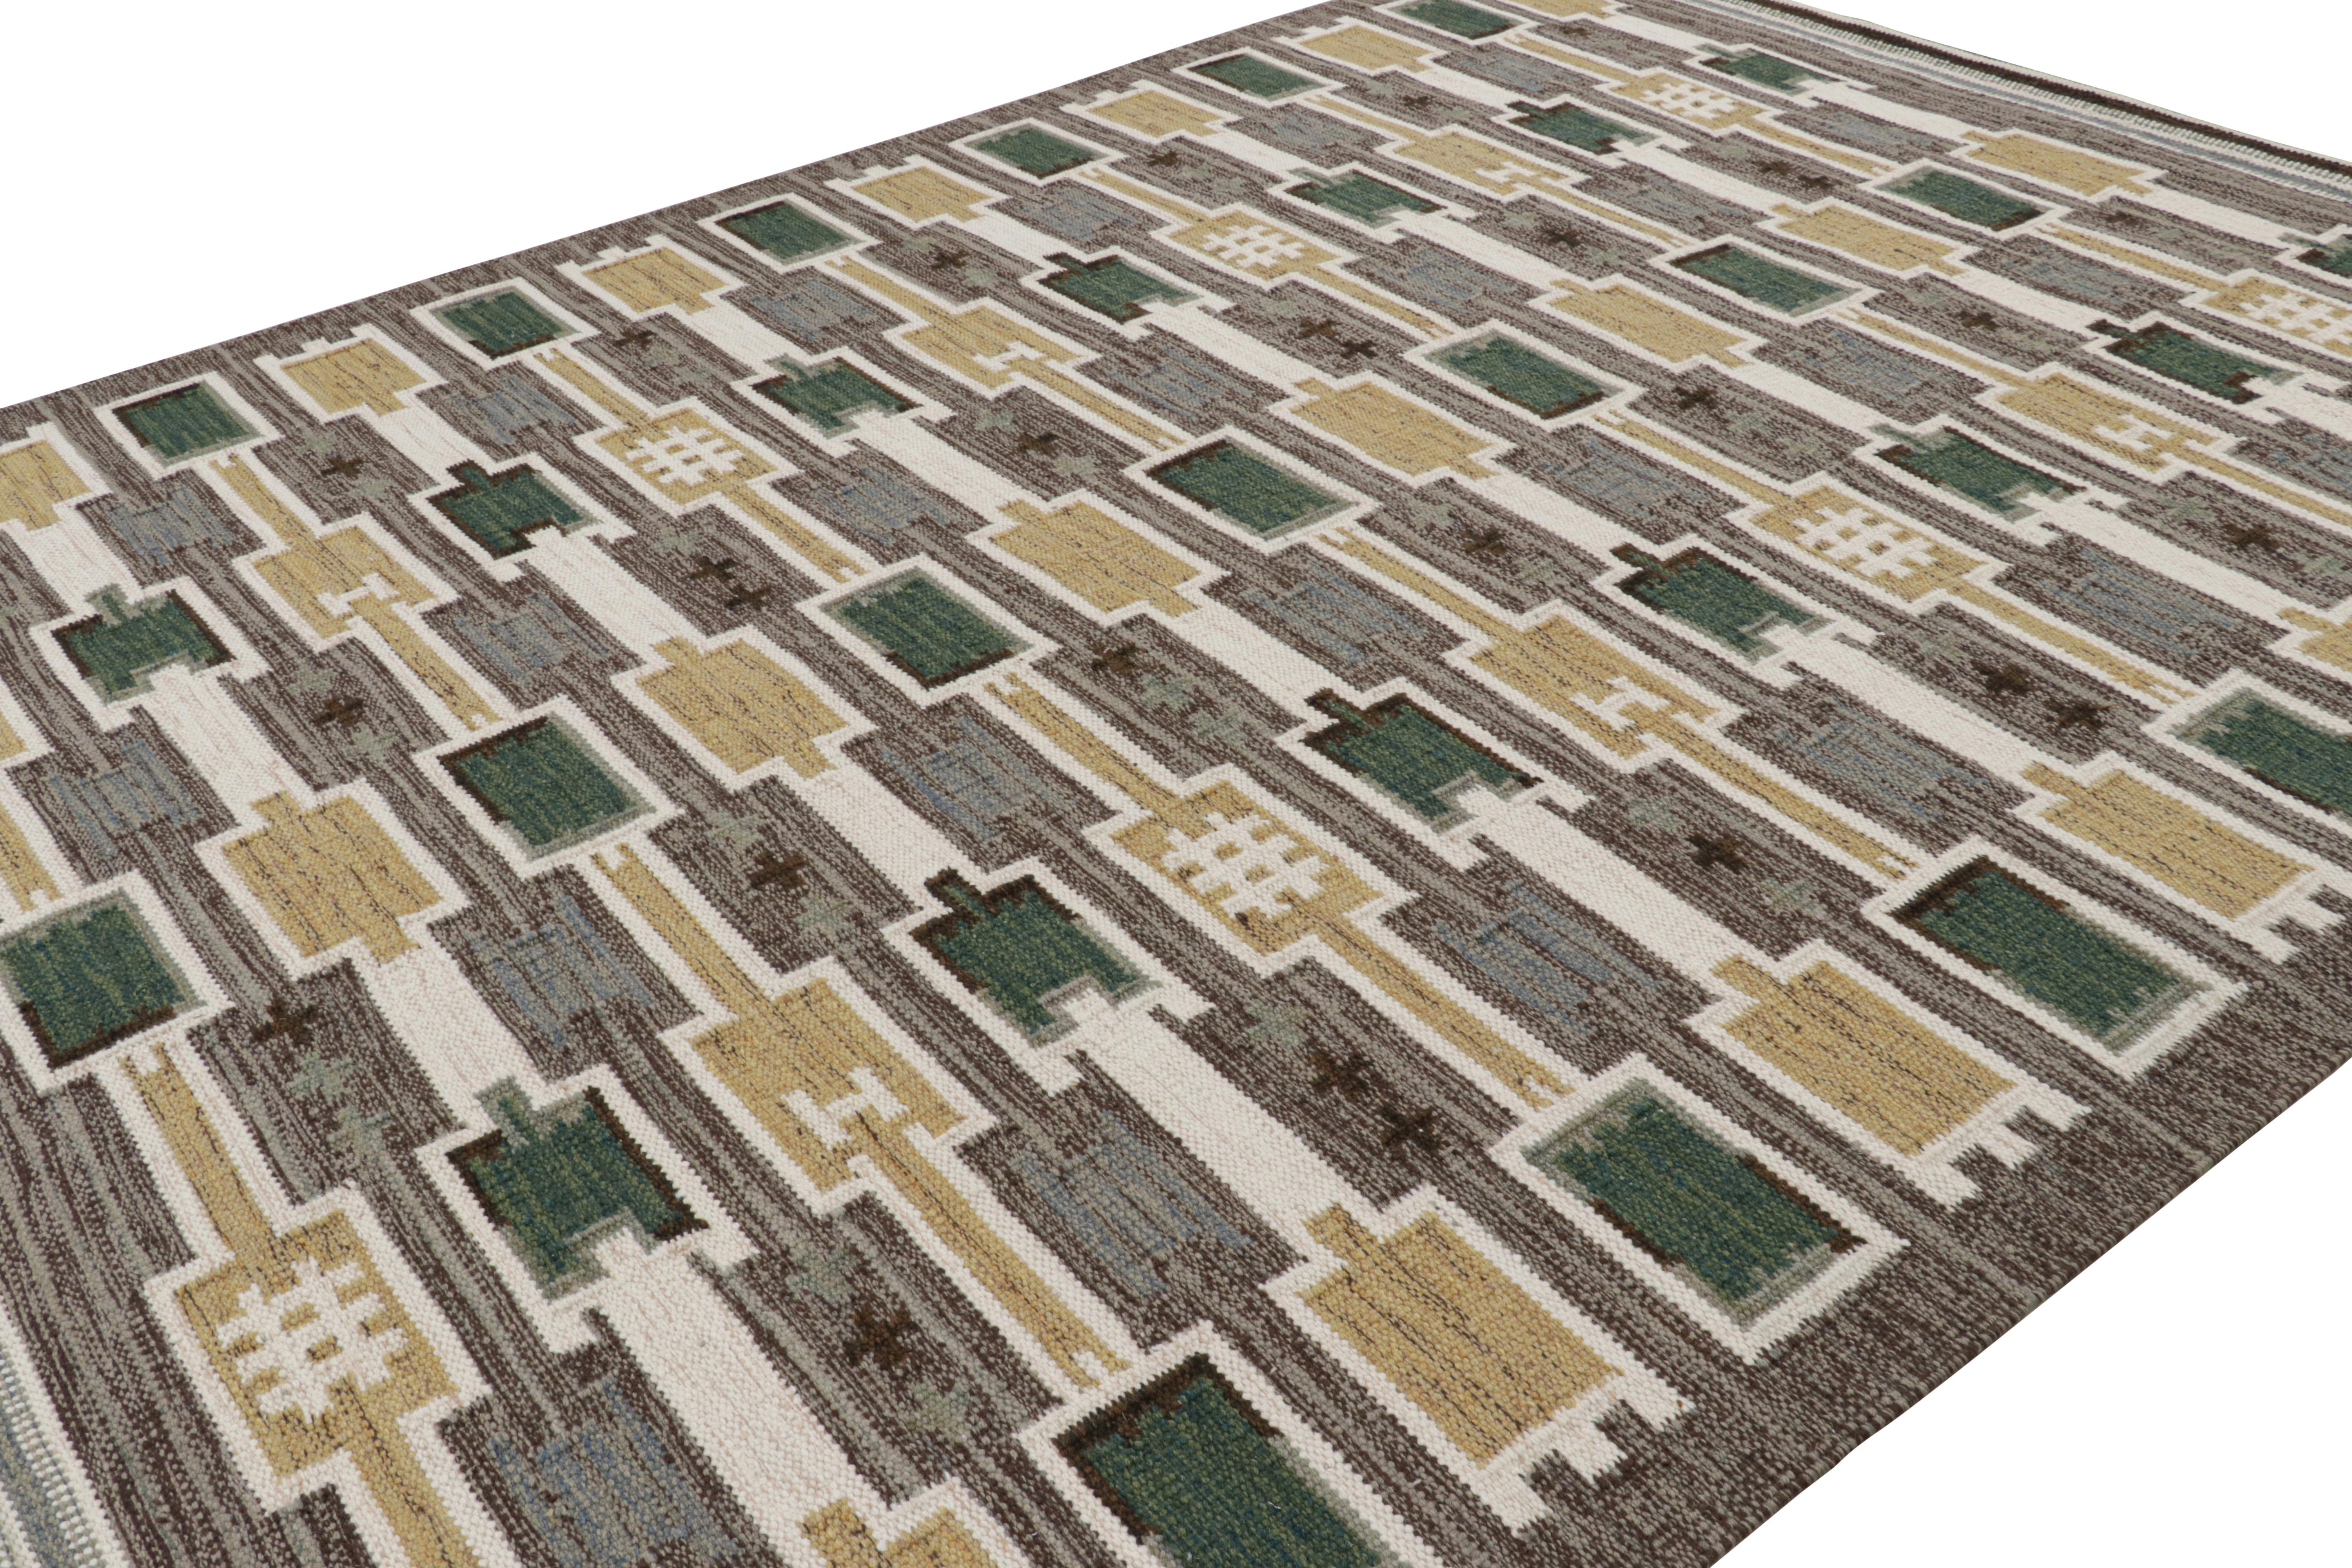 Indian Rug & Kilim’s Scandinavian Style Rug with Patterns in Green, Gold and Brown For Sale